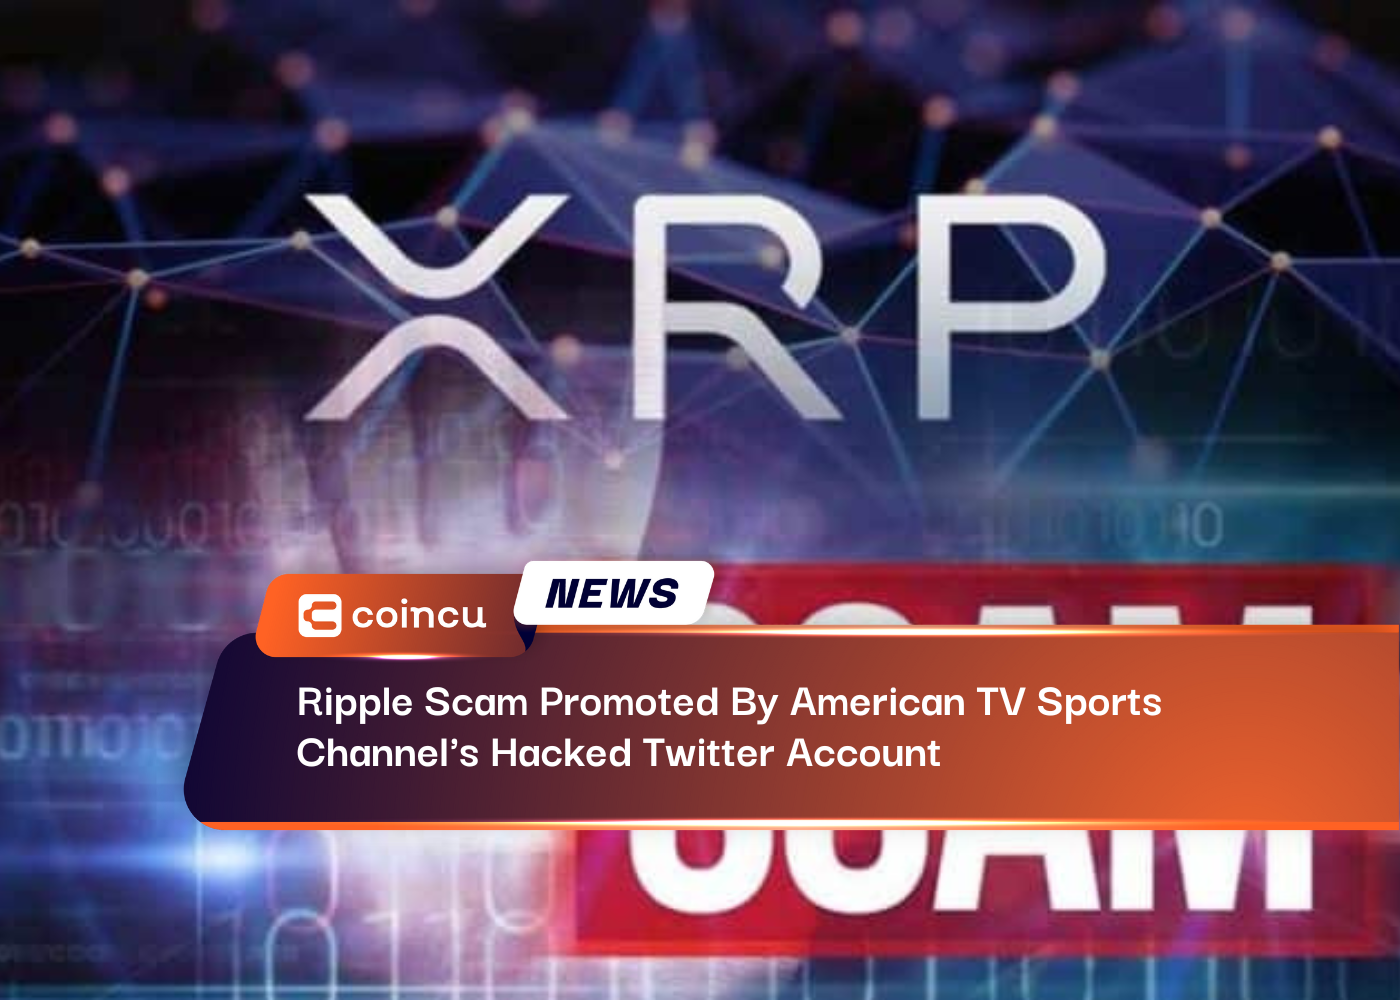 Ripple Scam Promoted By American TV Sports